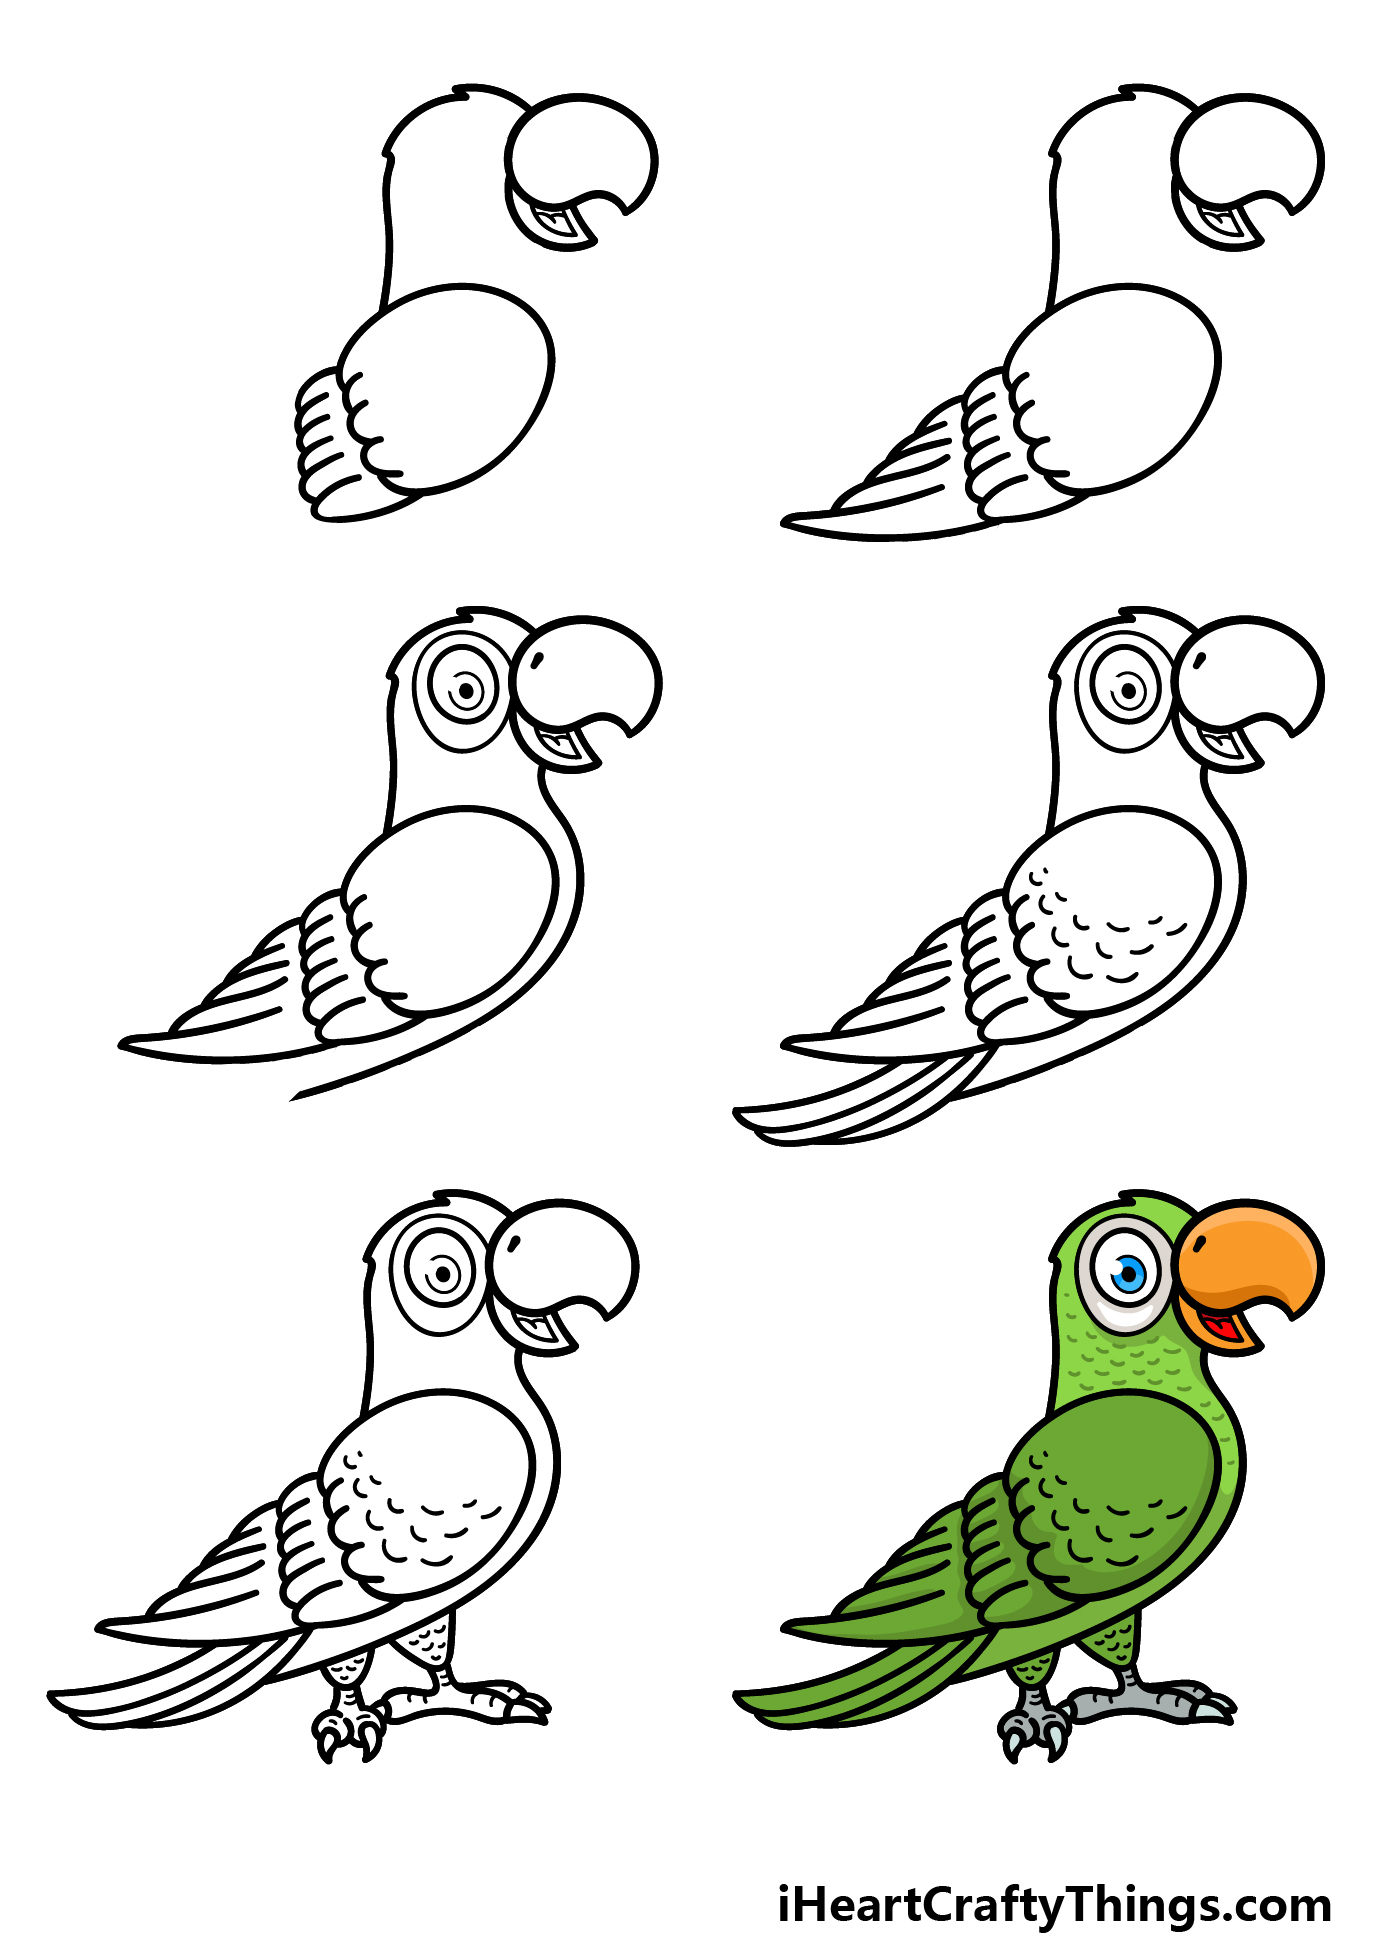 how to draw a cartoon parrot in 6 steps